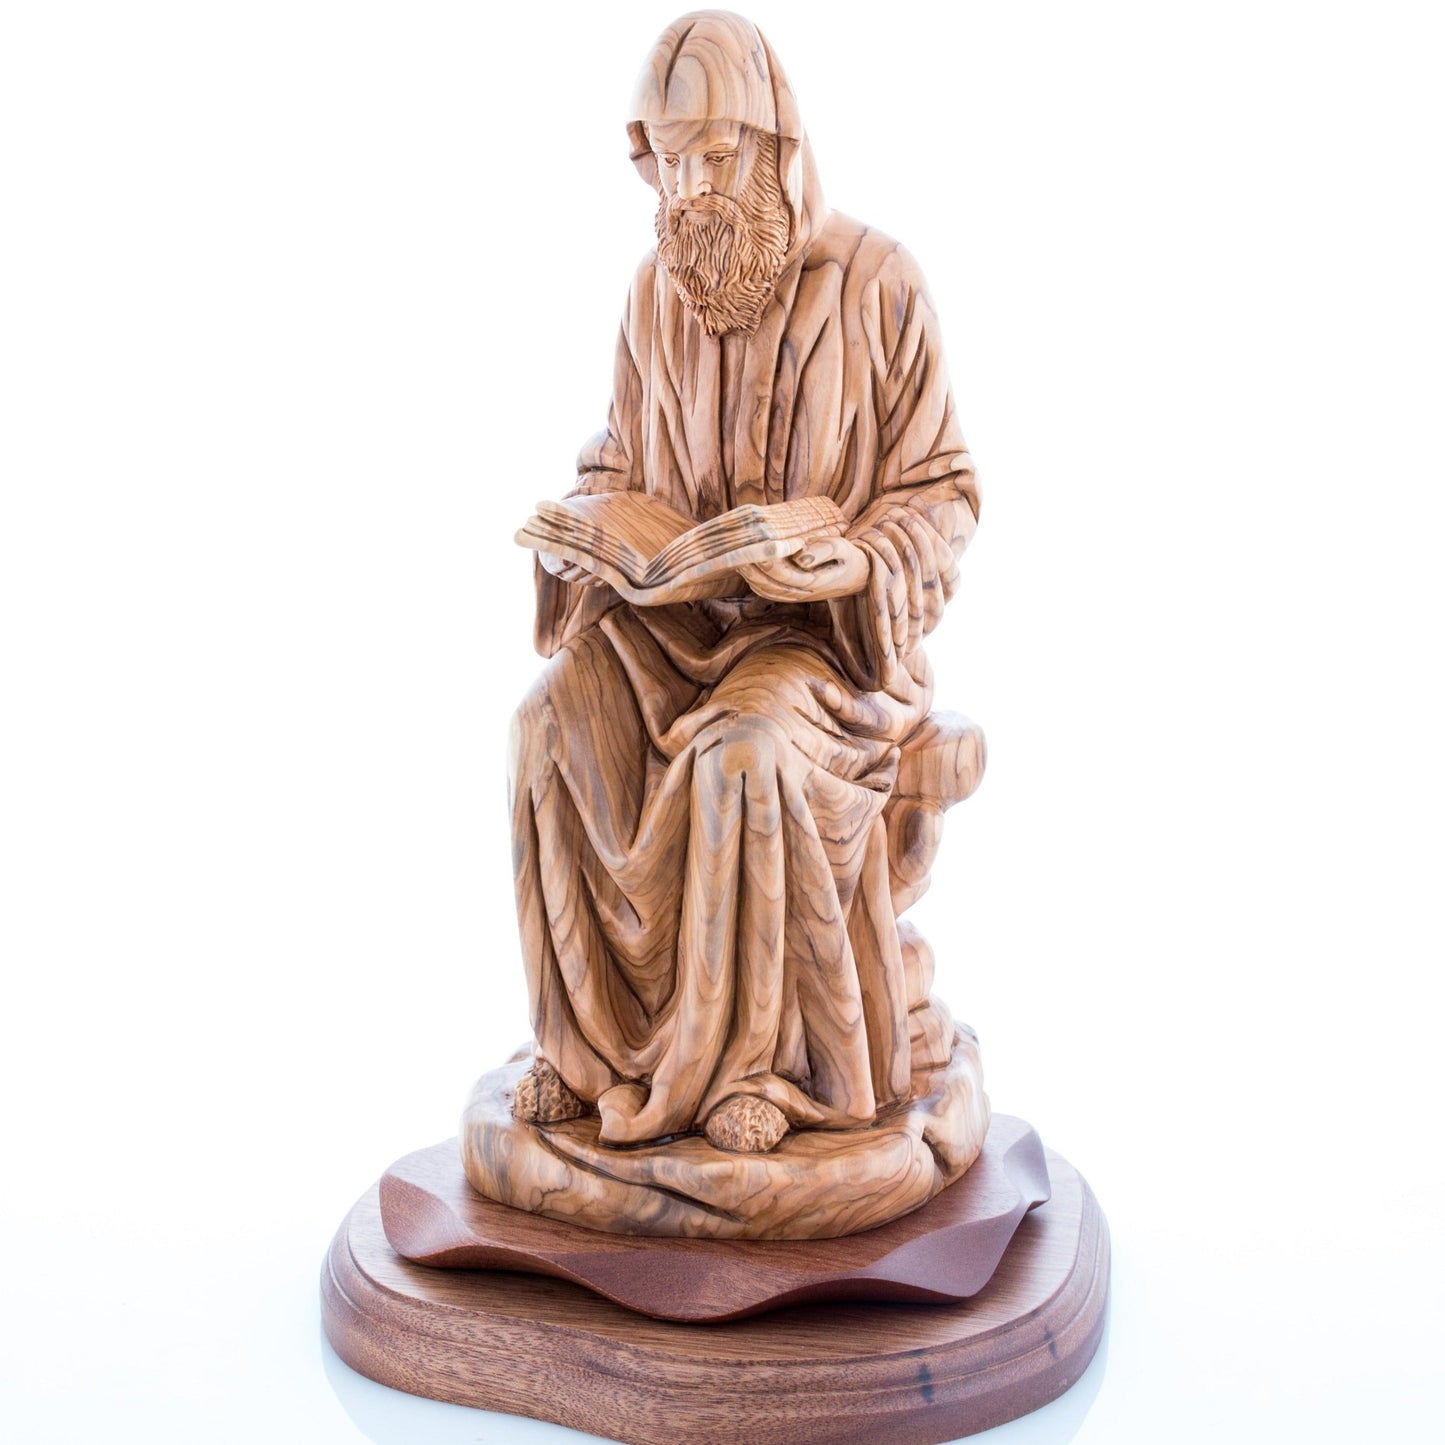 St. Charbel Carved Wooden Sculpture, 13"  from Holy Land